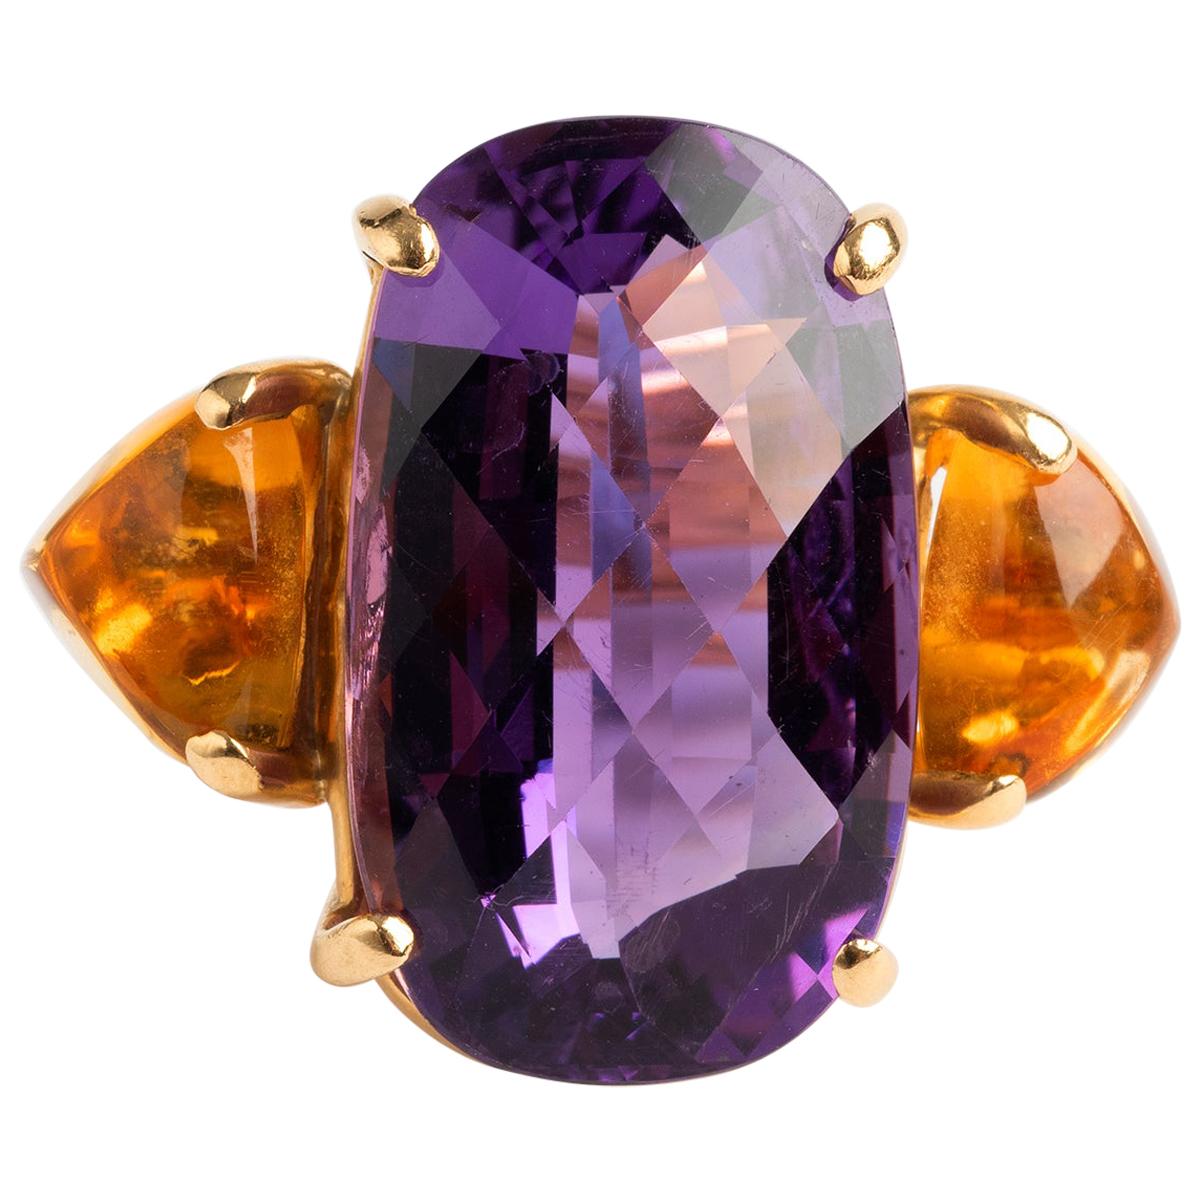 Vintage and Unusual, Rose Cut Amethyst and Citrine Dress Watch, 18K Yellow Gold.